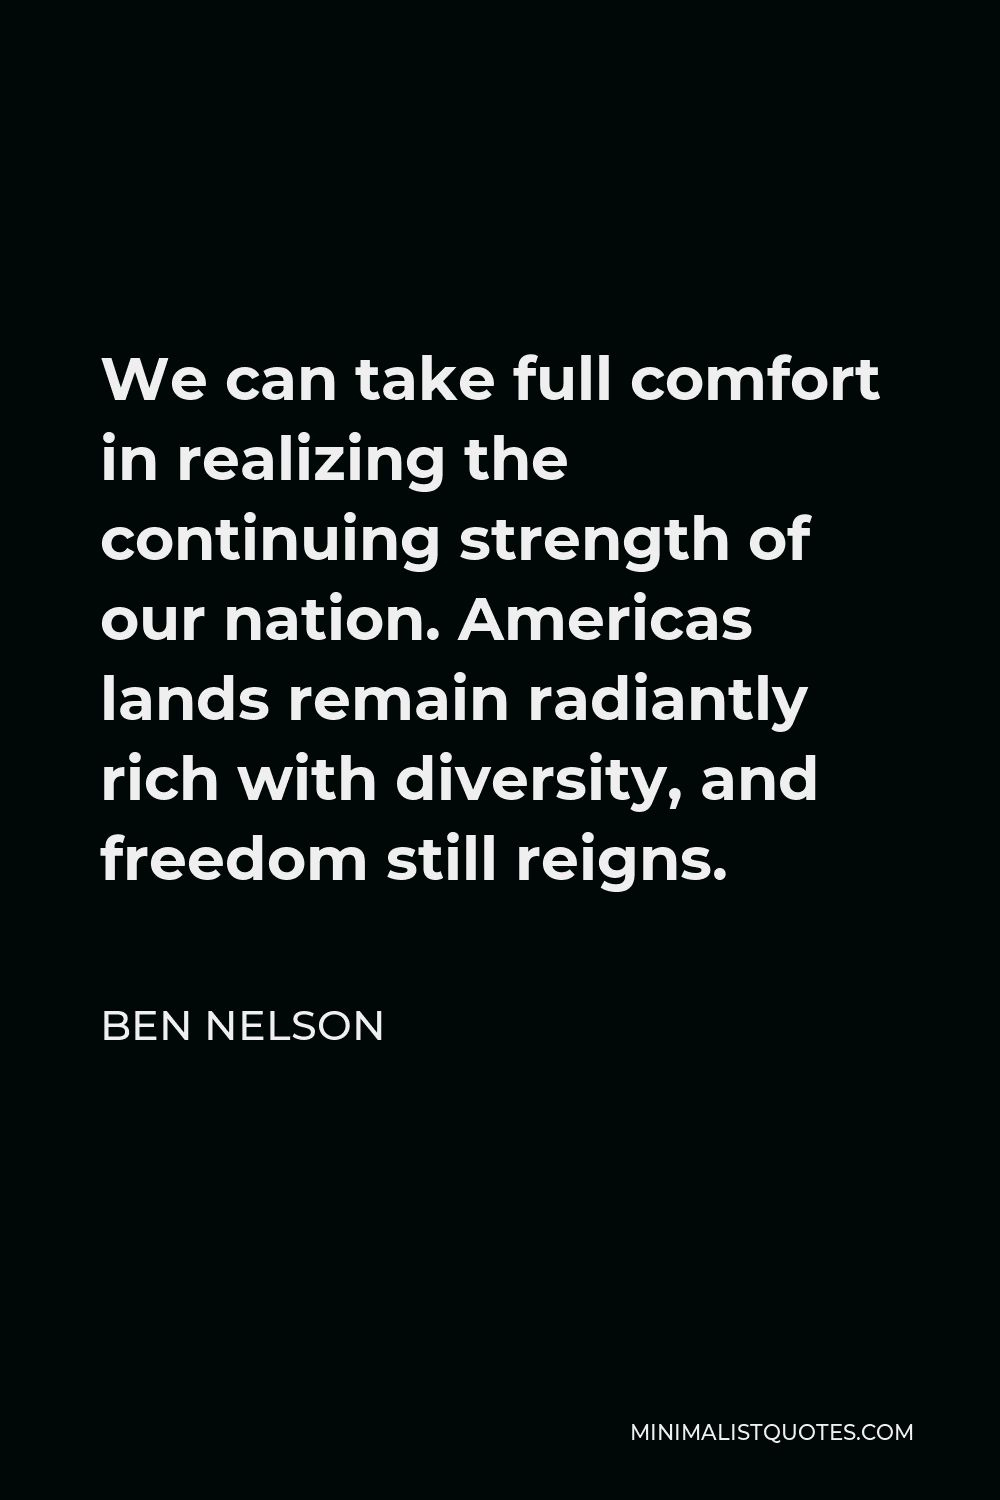 Ben Nelson Quote - We can take full comfort in realizing the continuing strength of our nation. Americas lands remain radiantly rich with diversity, and freedom still reigns.